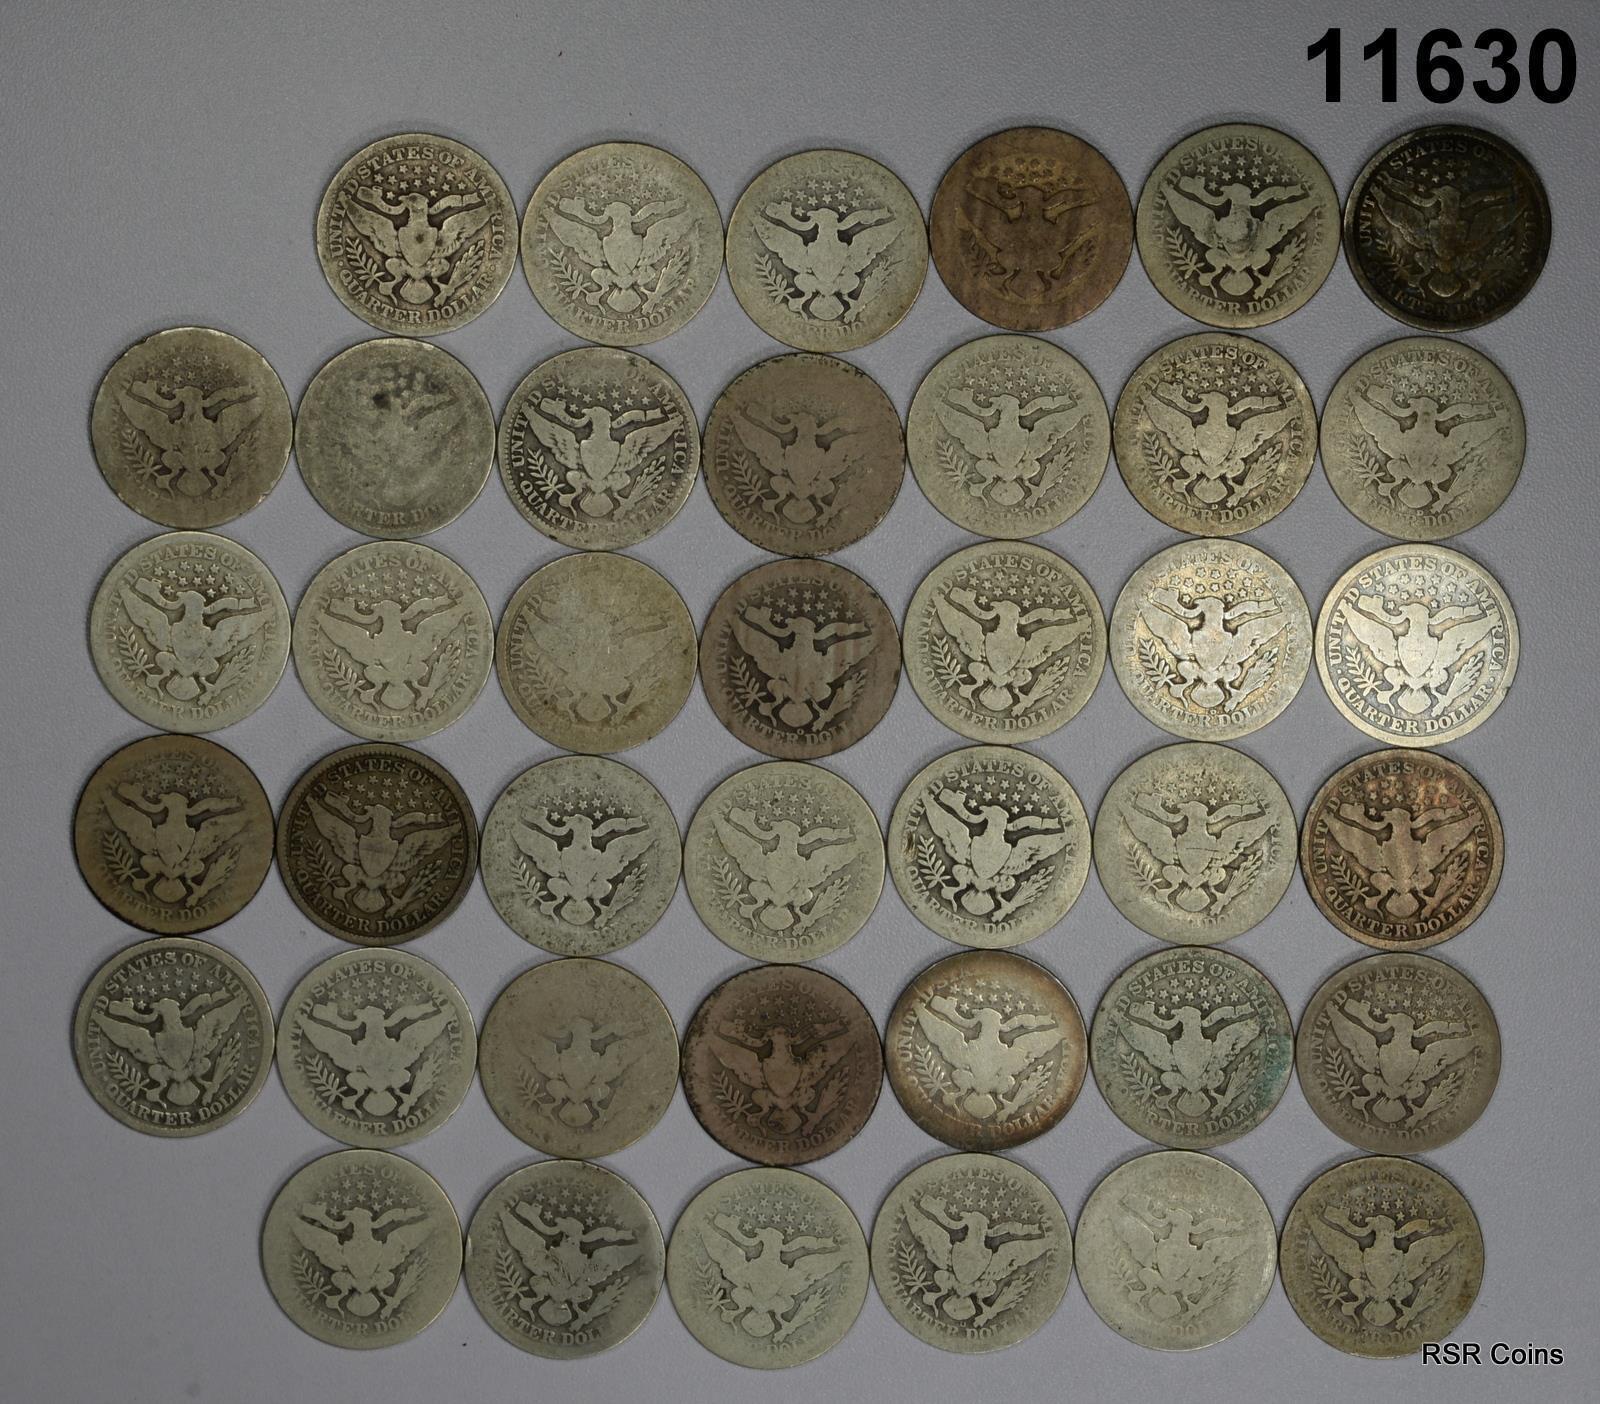 BARBER QUARTER NEARLY FULL DATES ROLL OF 40 COINS 90% SILVER #11630